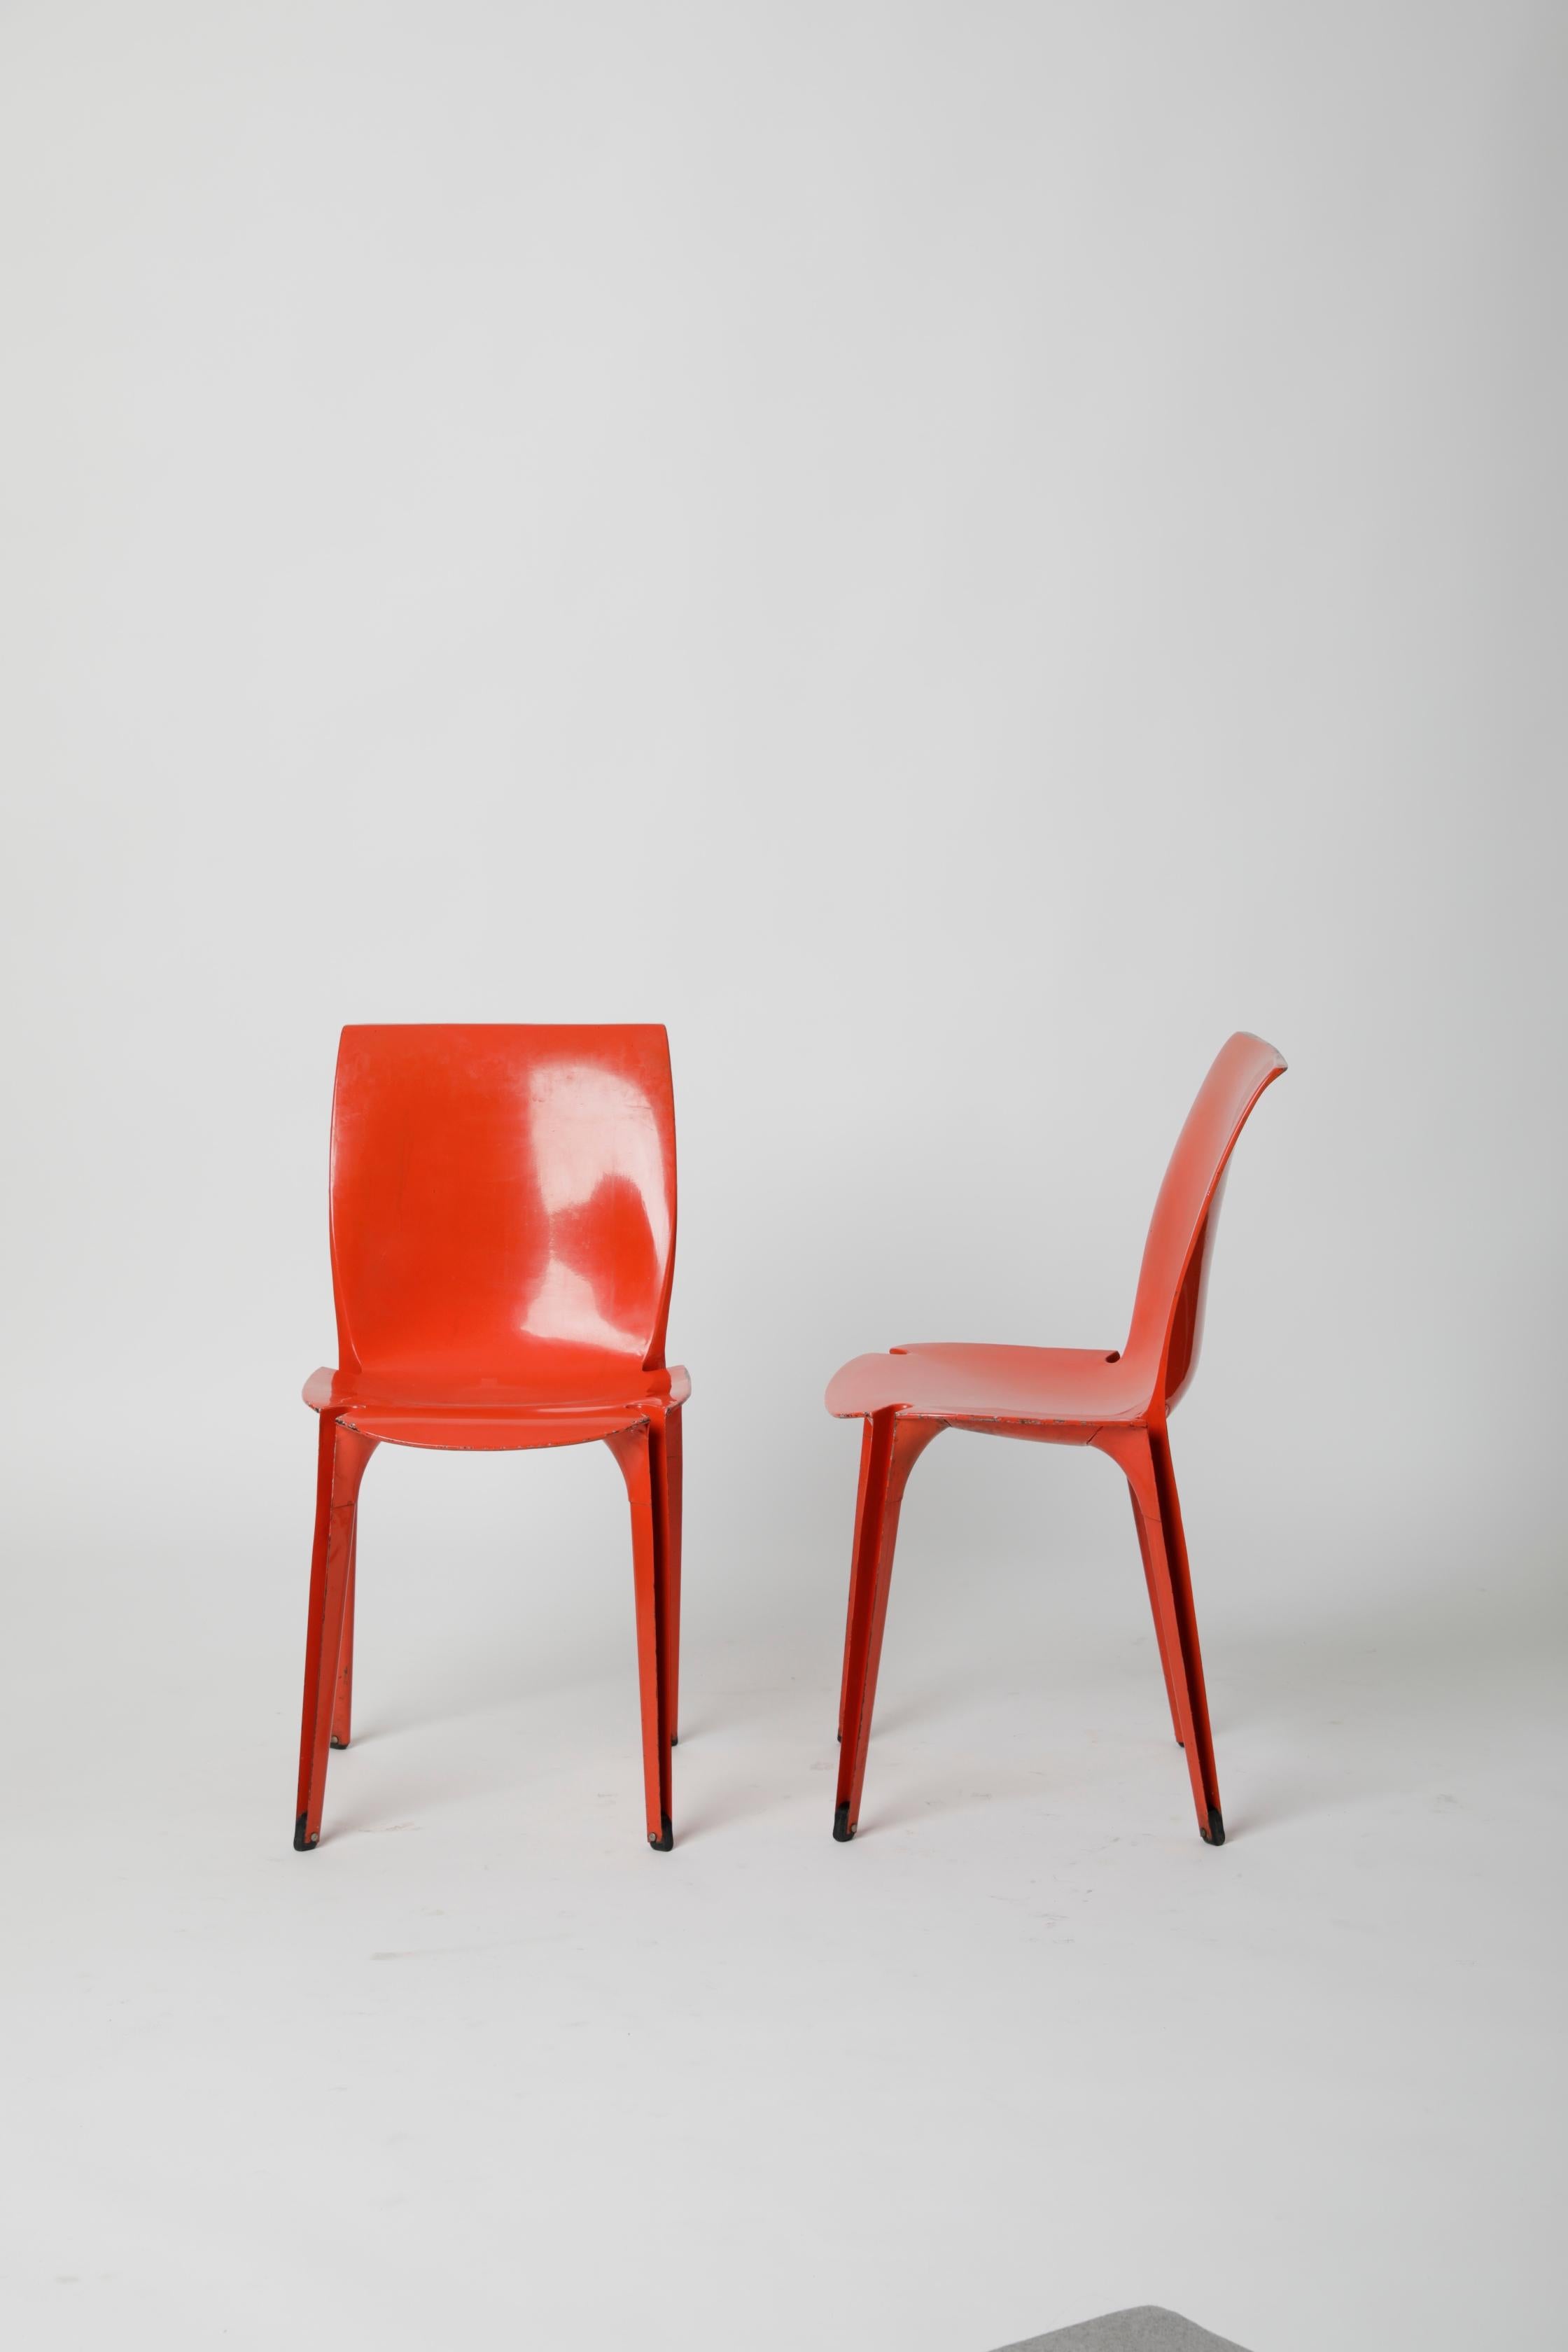 Designed by the famous Italian architect Marco Zanuso and Richard Sapper nel 1959, the chair has an absolutely futuristic shape for the times which it was made. The 